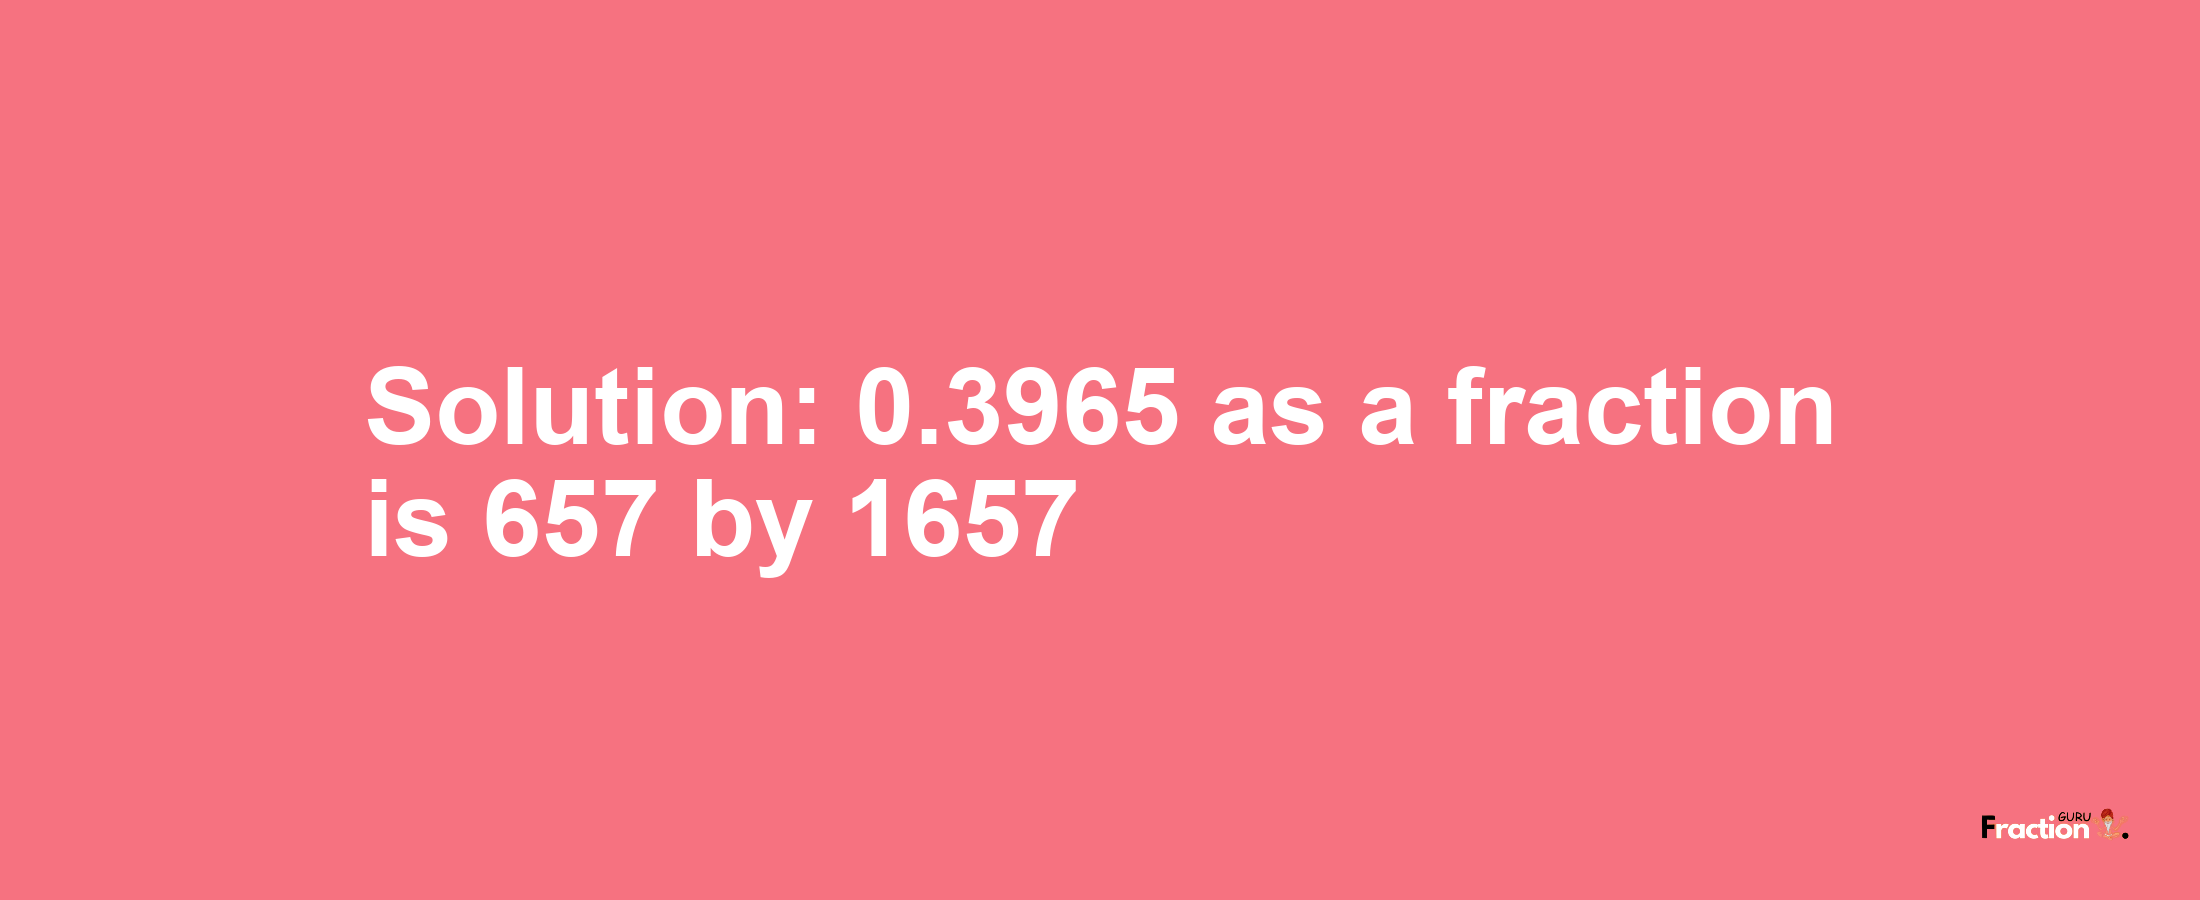 Solution:0.3965 as a fraction is 657/1657